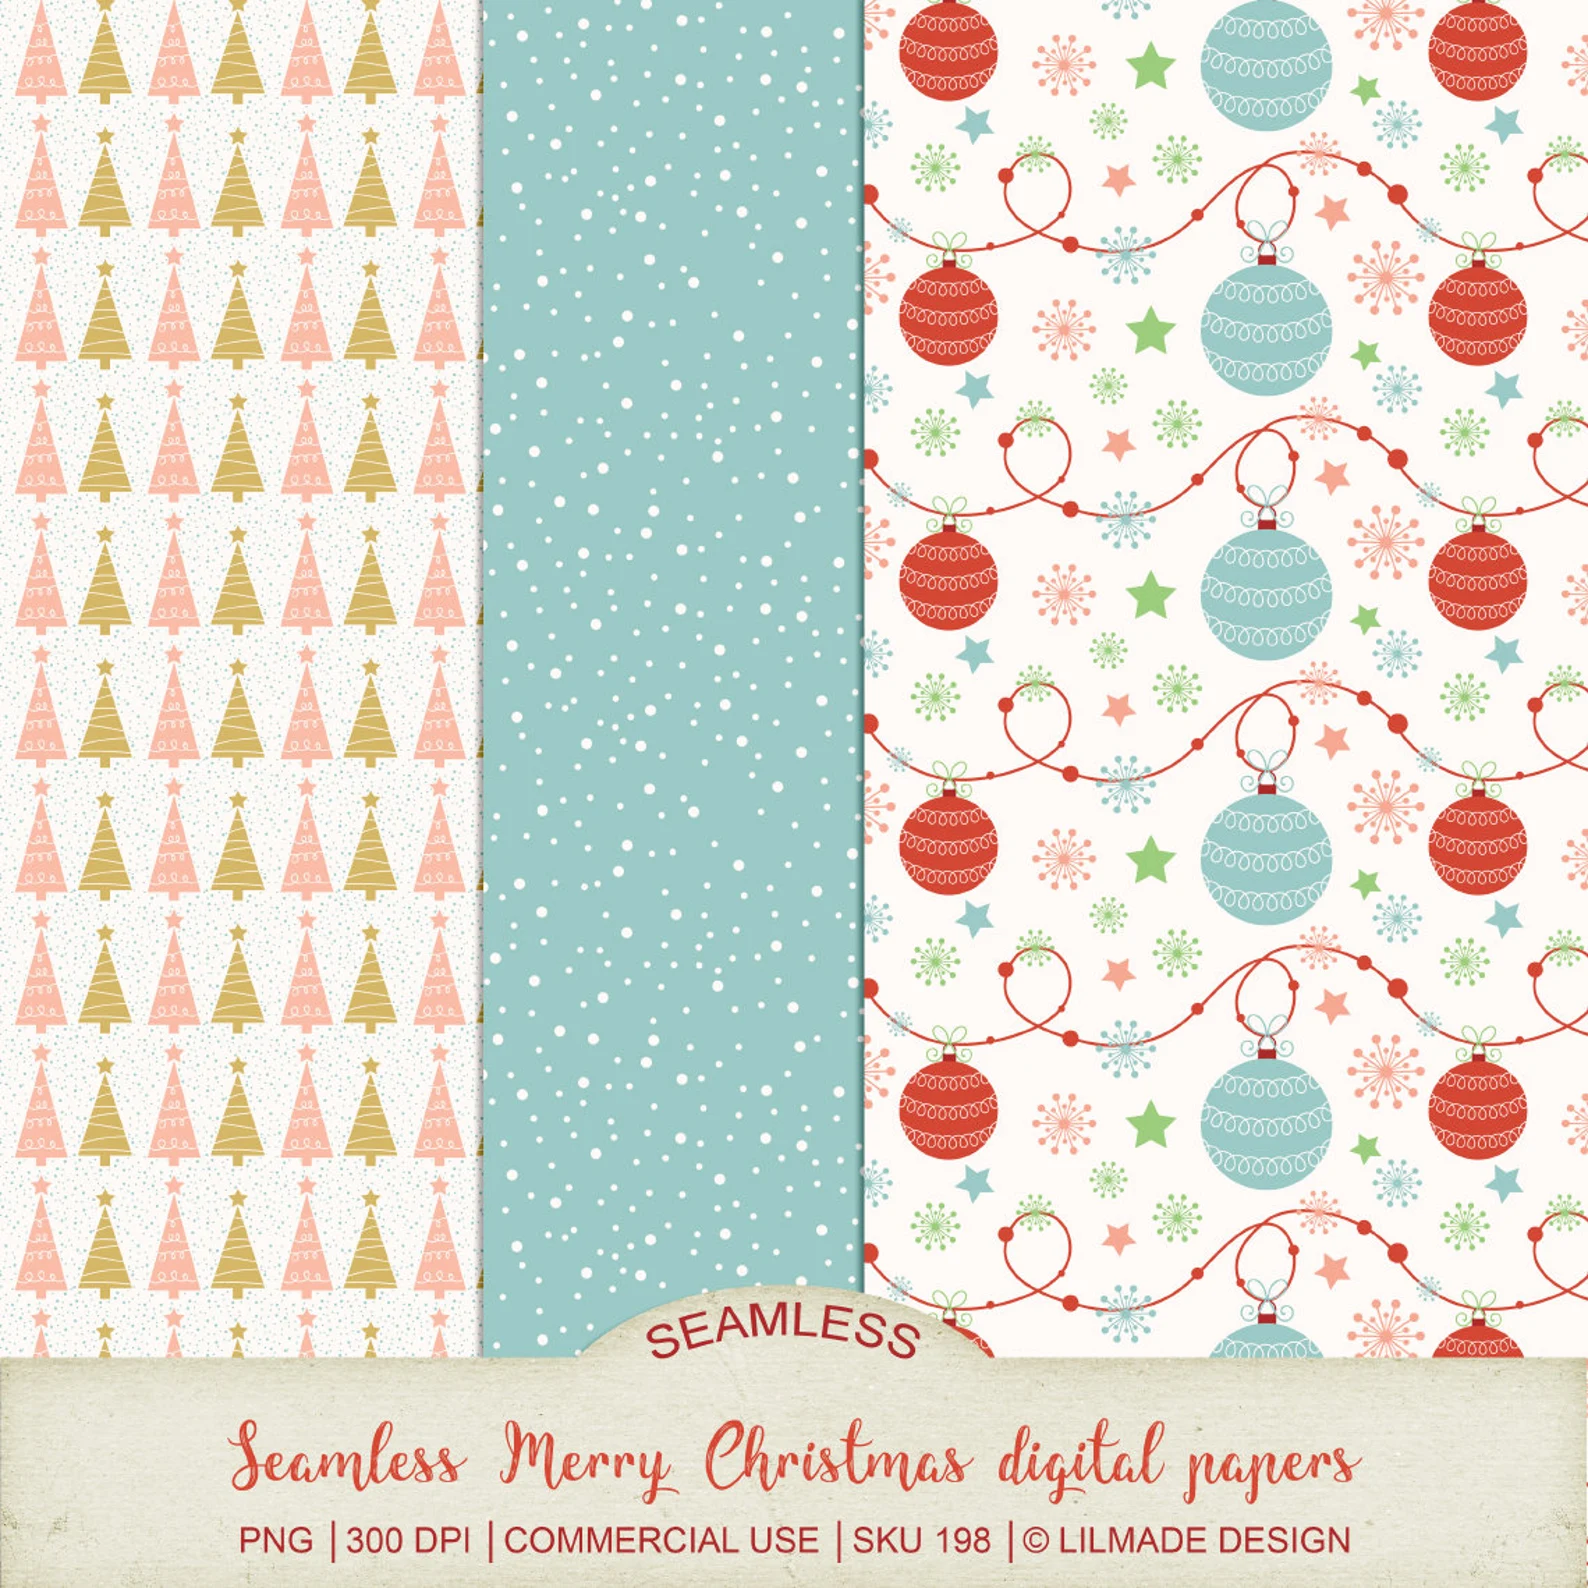 Seamless Christmas backgrounds featuring Christmas tree patterns, snow patterns and ornament patterns